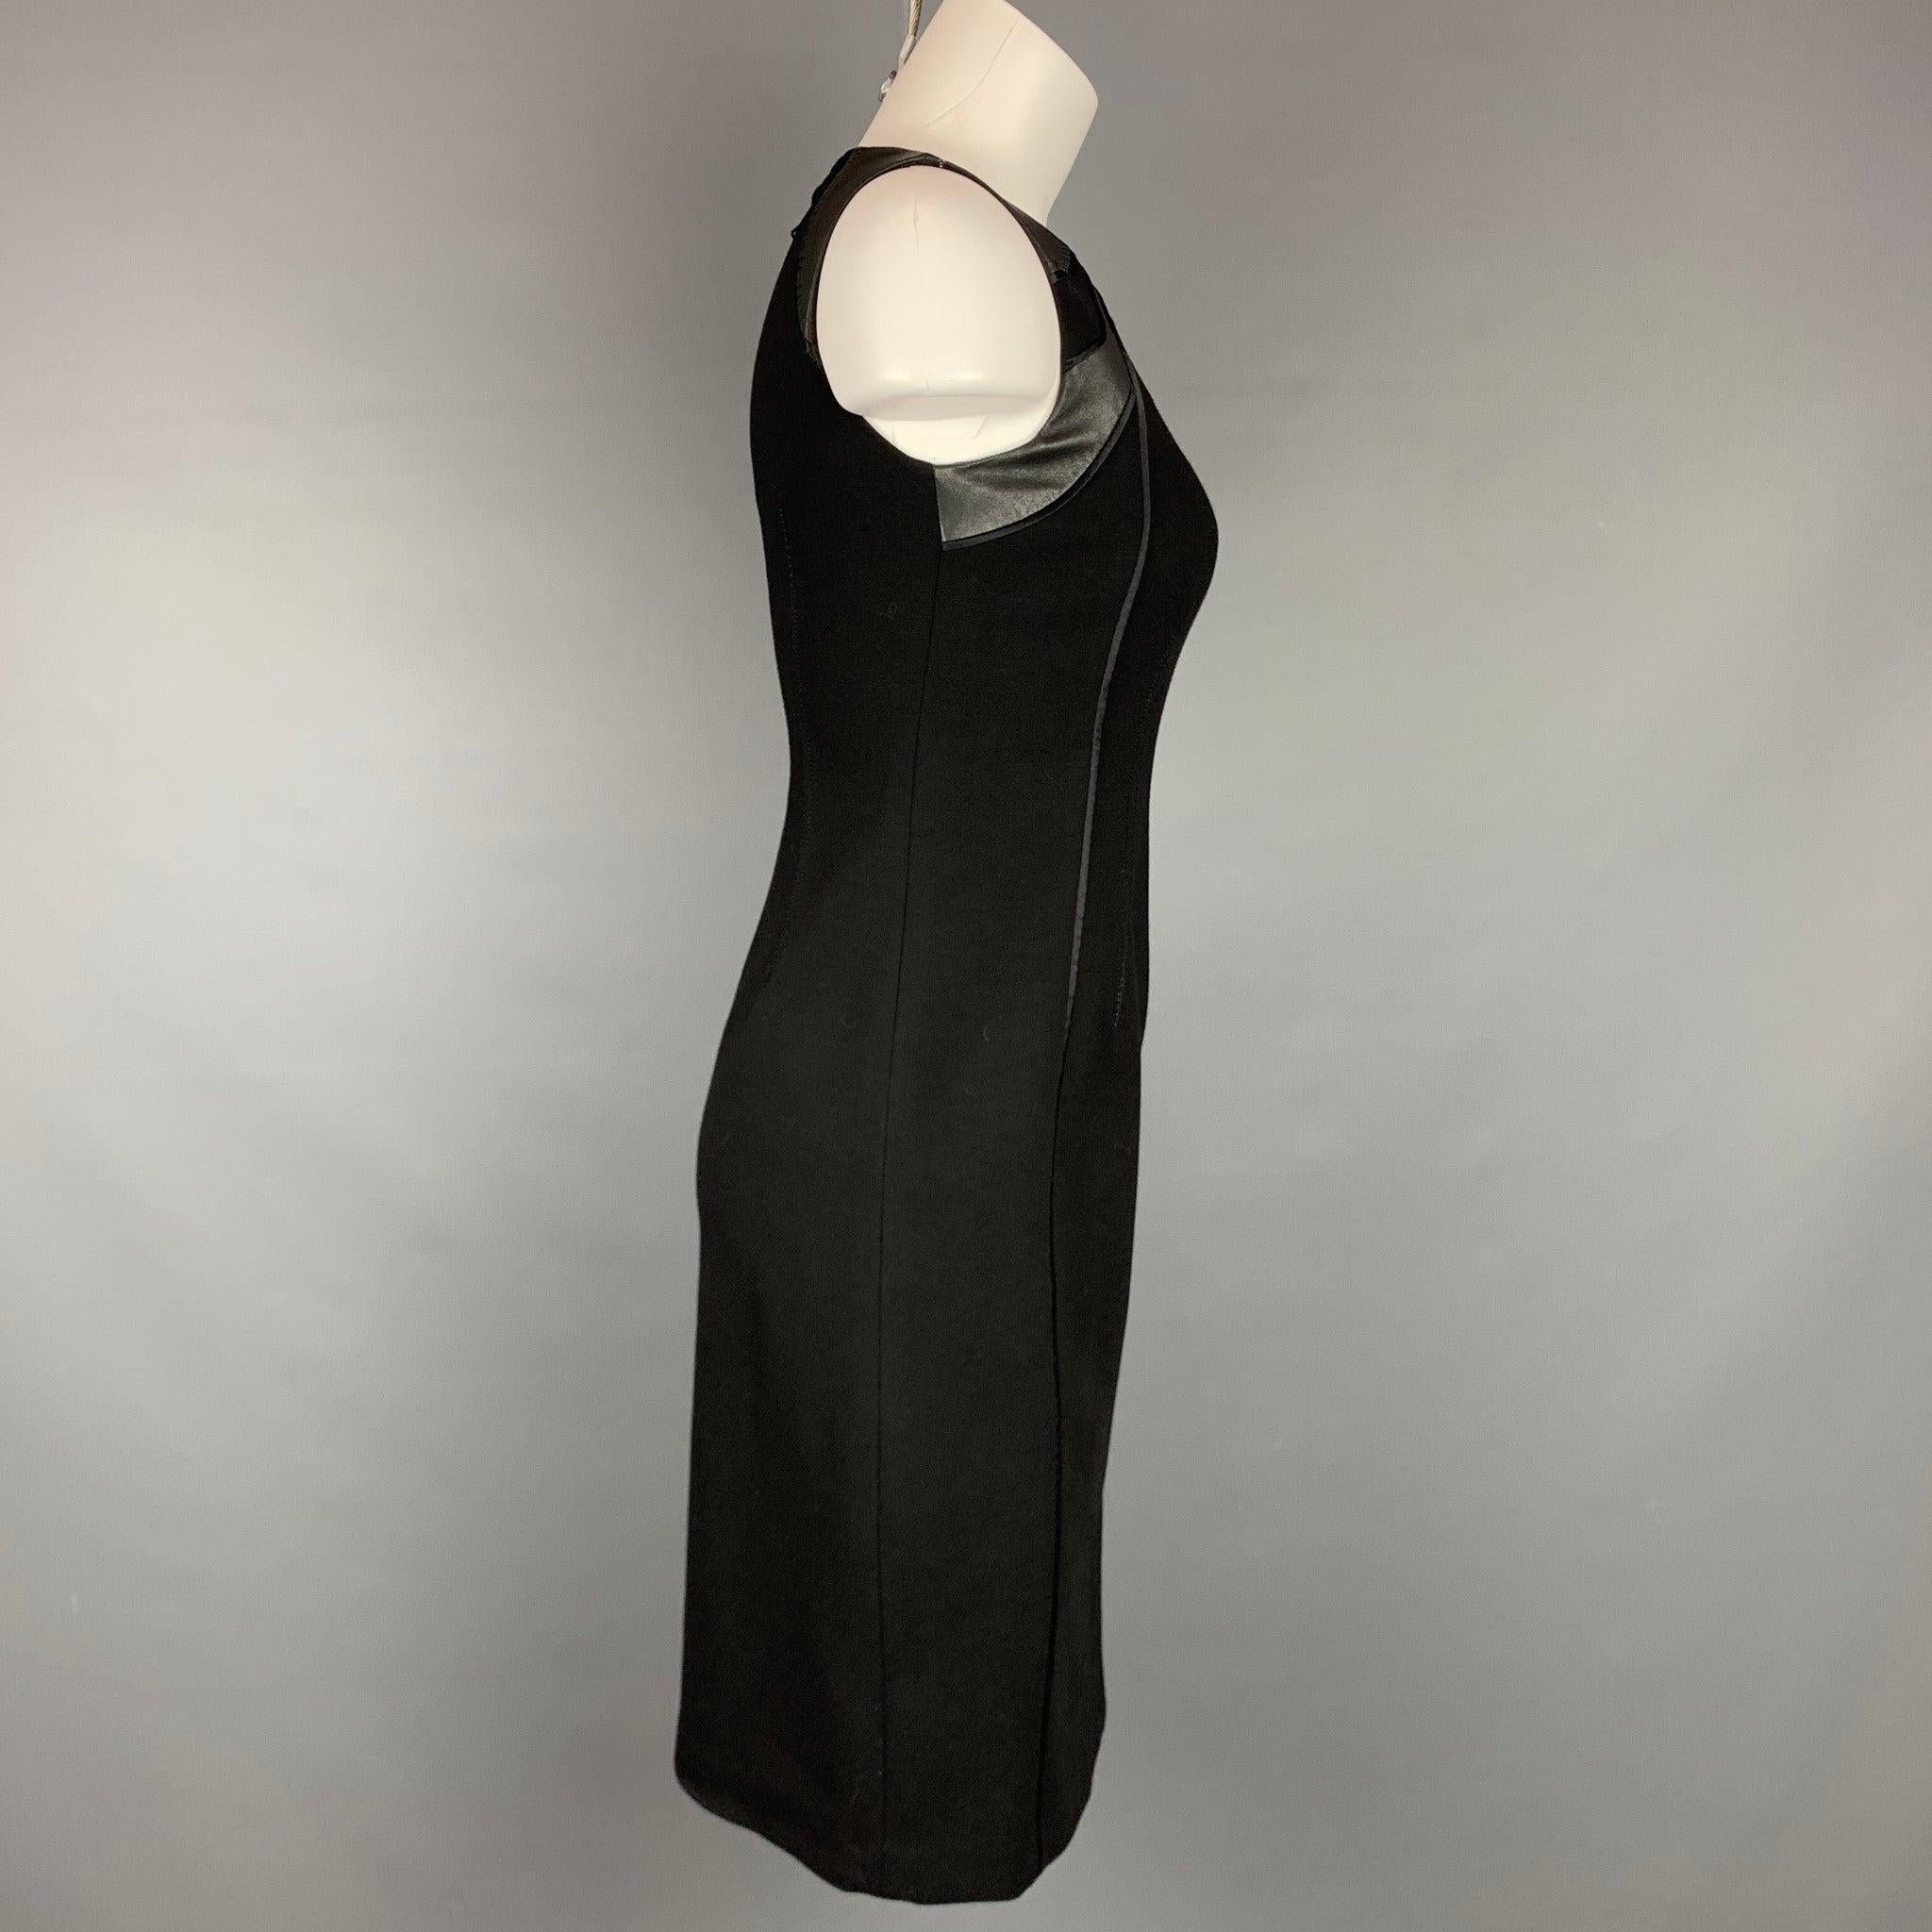 ELIE TAHARI dress comes in a black viscose blend with a leather trim featuring a shift style, sleeveless, top stitching, and a back zipper closure.
Very Good
Pre-Owned Condition. 

Marked:   US 0 

Measurements: 
 
Shoulder: 13 inches  Bust: 30